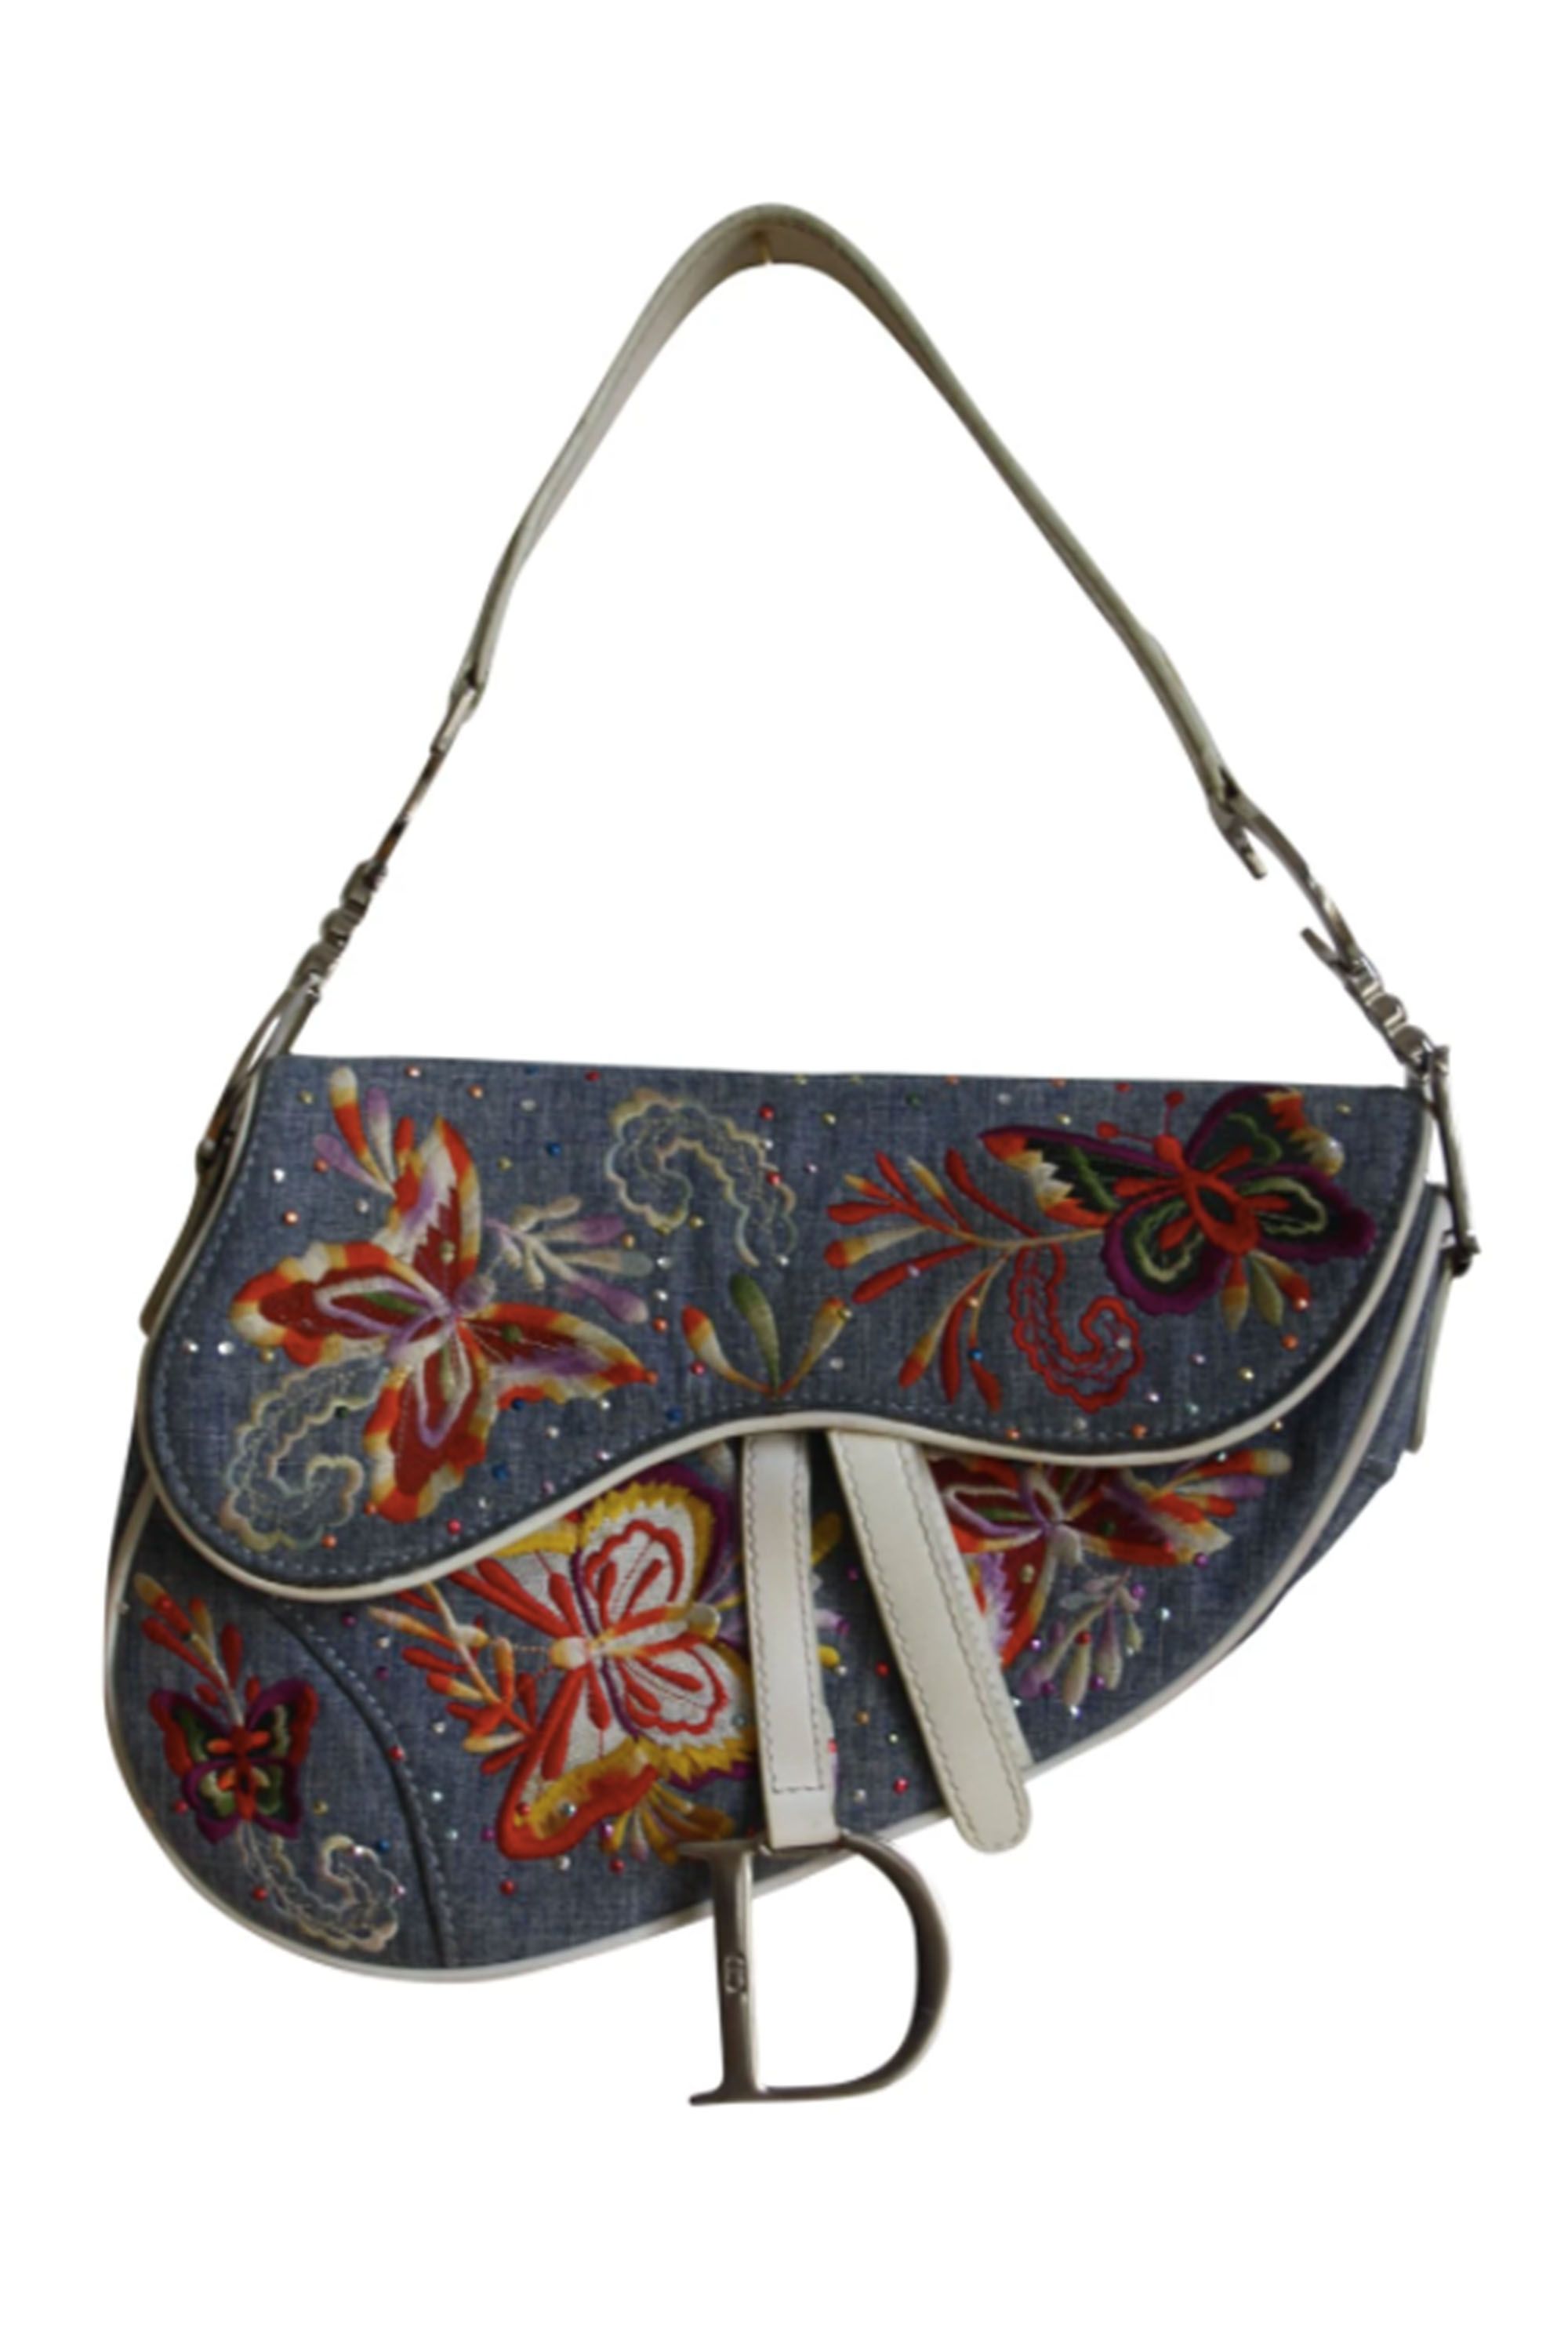 Dior Butterfly Saddle Bag Buy Now Clearance 56 OFF wwwhotelsiamedu